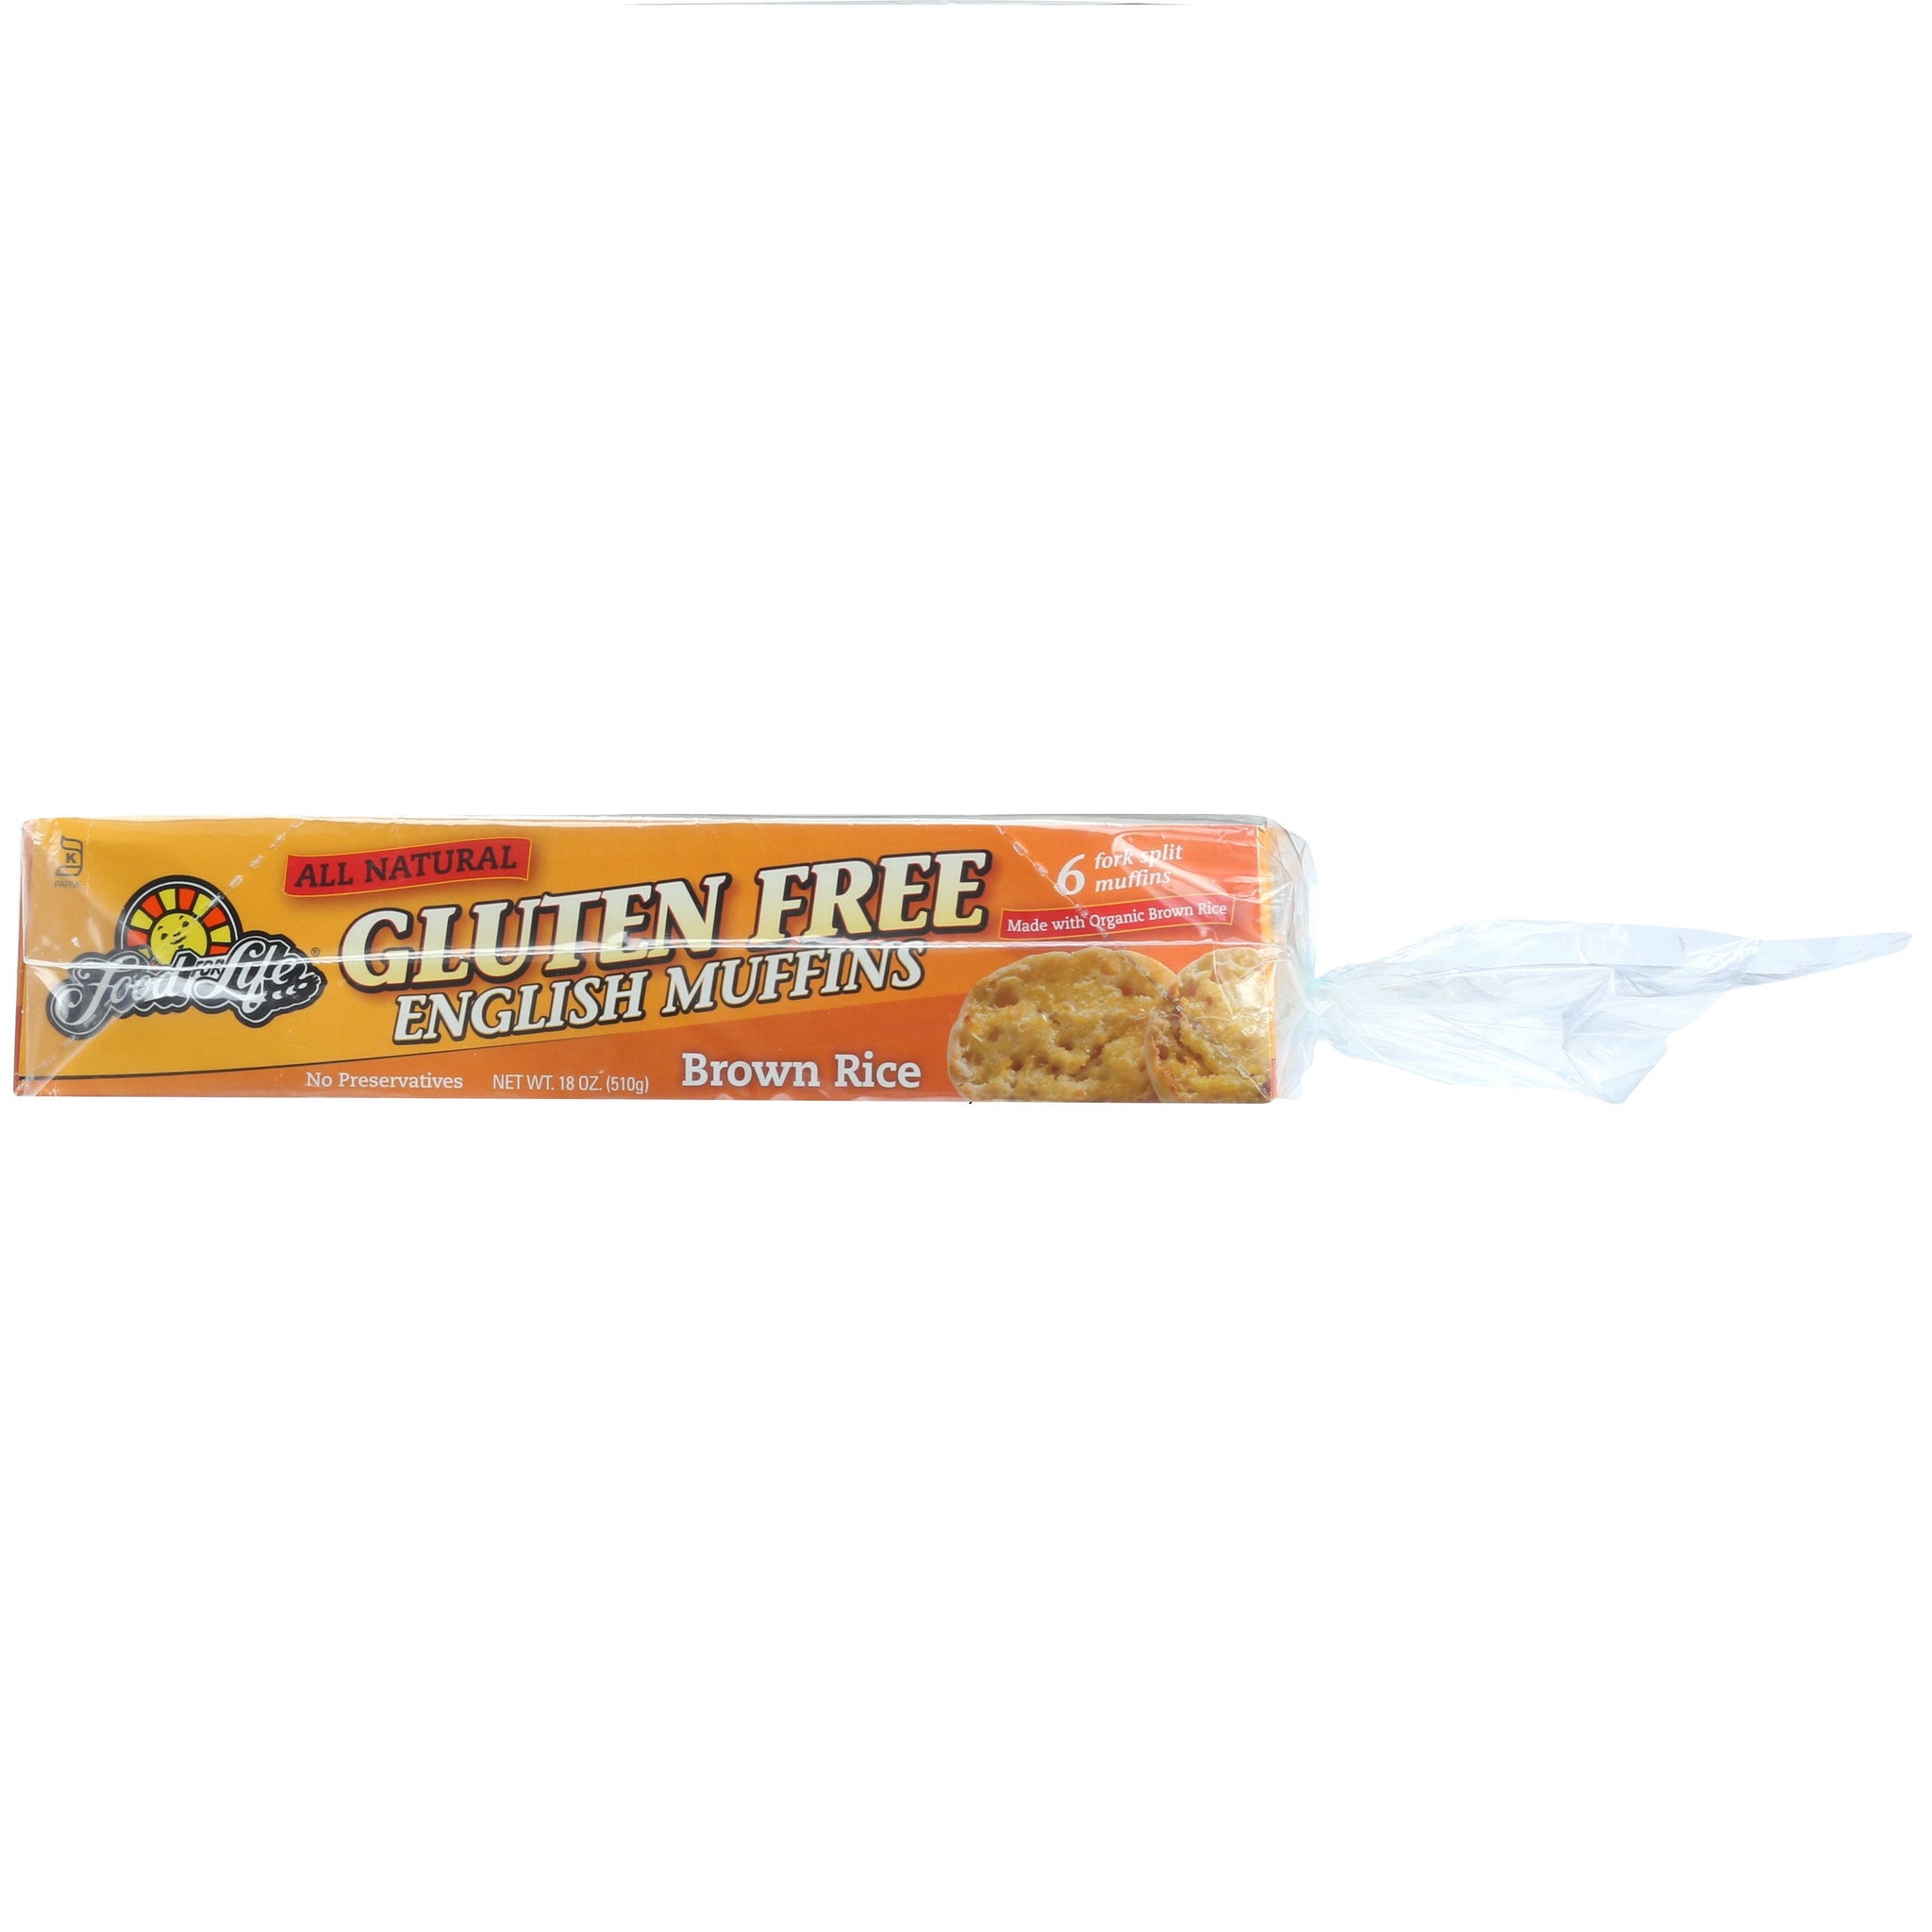 Food For Life Gluten Free Brown Rice English Muffins, 18 Oz (Pack of 6)